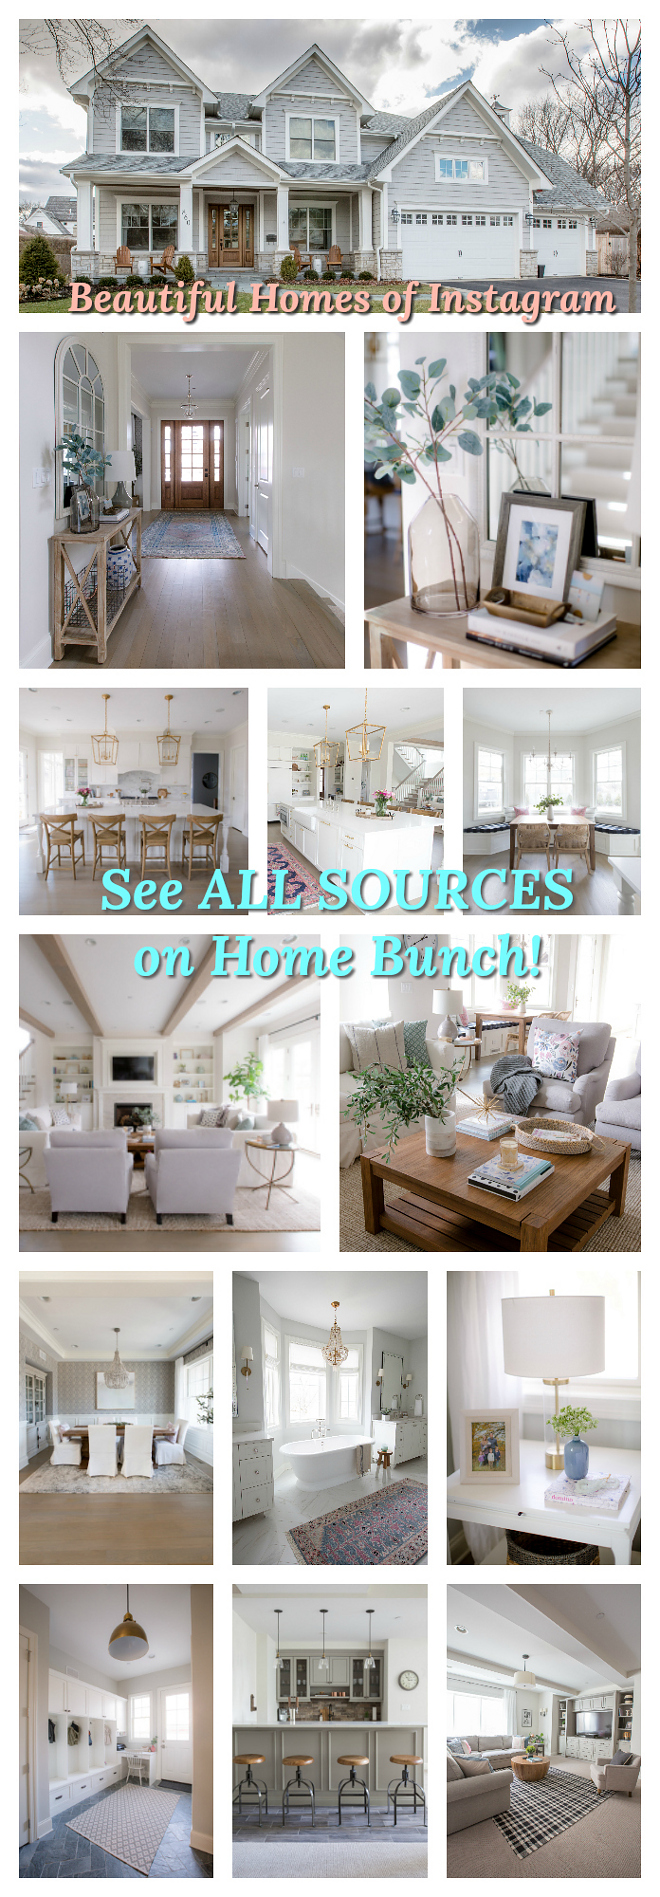 Home Bunch Most Popular Blog Series Beautiful Homes of Instagram